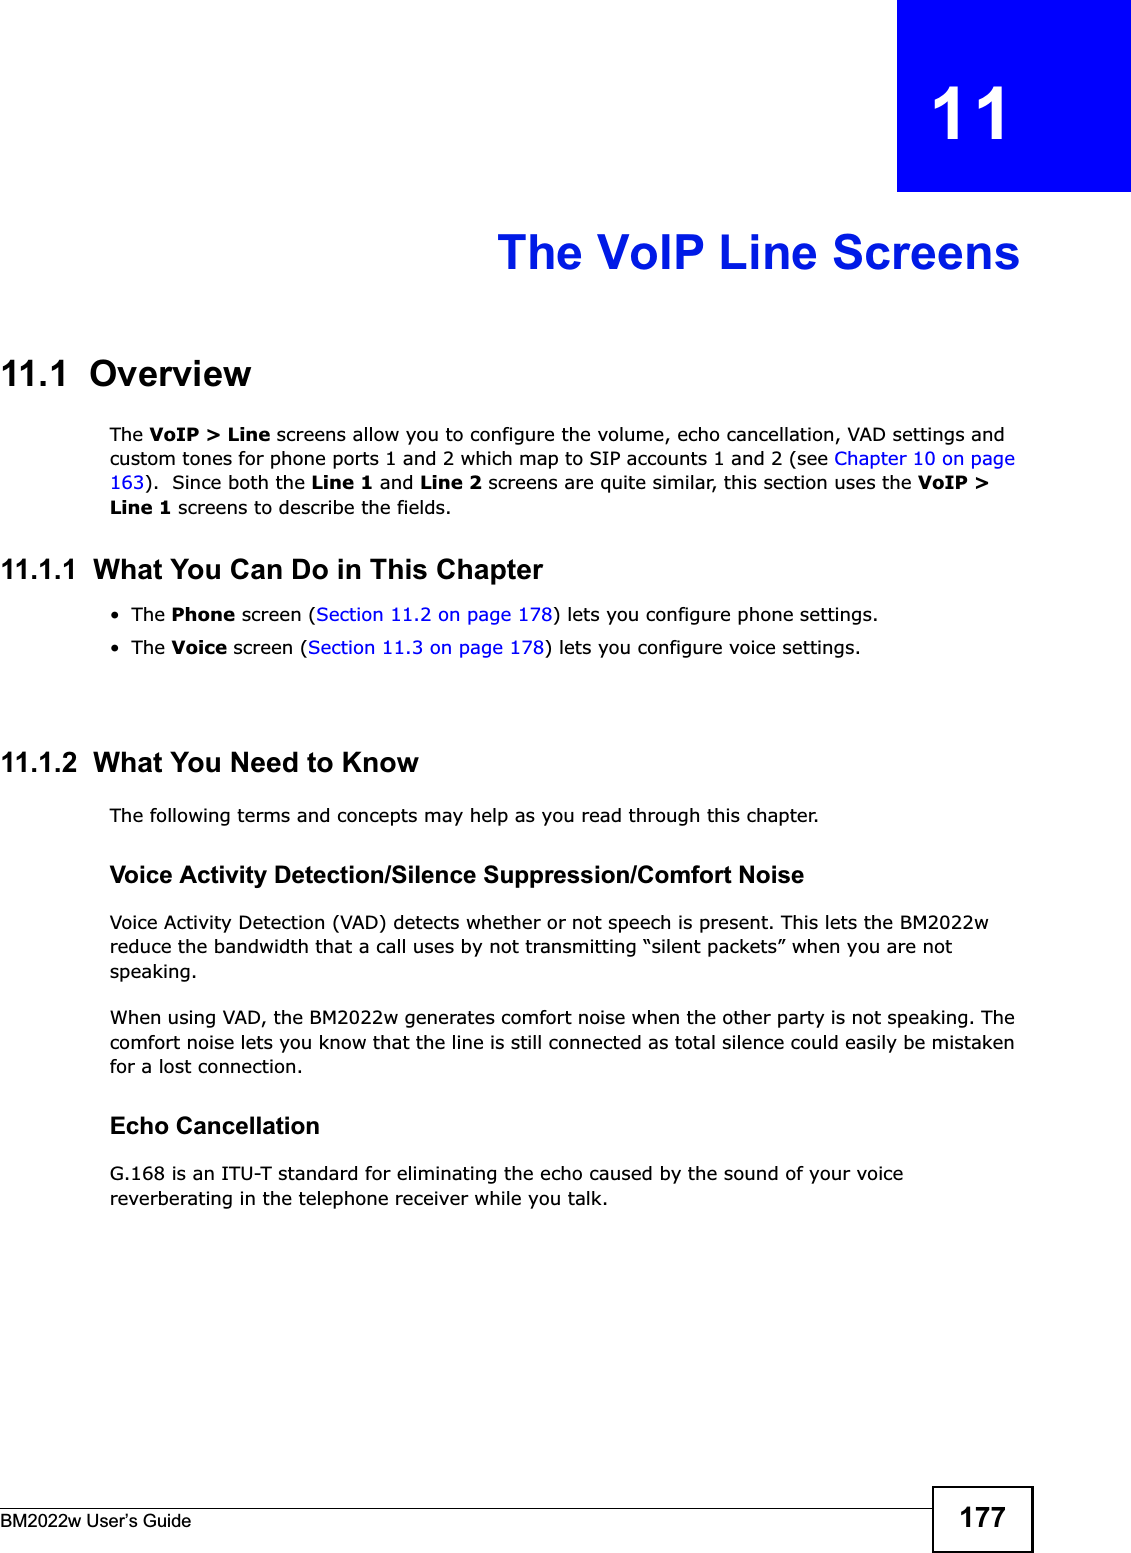 BM2022w User’s Guide 177CHAPTER   11The VoIP Line Screens11.1  OverviewThe VoIP &gt; Line screens allow you to configure the volume, echo cancellation, VAD settings and custom tones for phone ports 1 and 2 which map to SIP accounts 1 and 2 (see Chapter 10 on page 163).  Since both the Line 1 and Line 2 screens are quite similar, this section uses the VoIP &gt; Line 1 screens to describe the fields.11.1.1  What You Can Do in This Chapter•The Phone screen (Section 11.2 on page 178) lets you configure phone settings.•The Voice screen (Section 11.3 on page 178) lets you configure voice settings.•The Region screen (Section 11.4 on page 179) lets you configure which country of the world the BM2022w is in.11.1.2  What You Need to KnowThe following terms and concepts may help as you read through this chapter.Voice Activity Detection/Silence Suppression/Comfort NoiseVoice Activity Detection (VAD) detects whether or not speech is present. This lets the BM2022w reduce the bandwidth that a call uses by not transmitting “silent packets” when you are not speaking.When using VAD, the BM2022w generates comfort noise when the other party is not speaking. The comfort noise lets you know that the line is still connected as total silence could easily be mistaken for a lost connection.Echo Cancellation G.168 is an ITU-T standard for eliminating the echo caused by the sound of your voice reverberating in the telephone receiver while you talk.